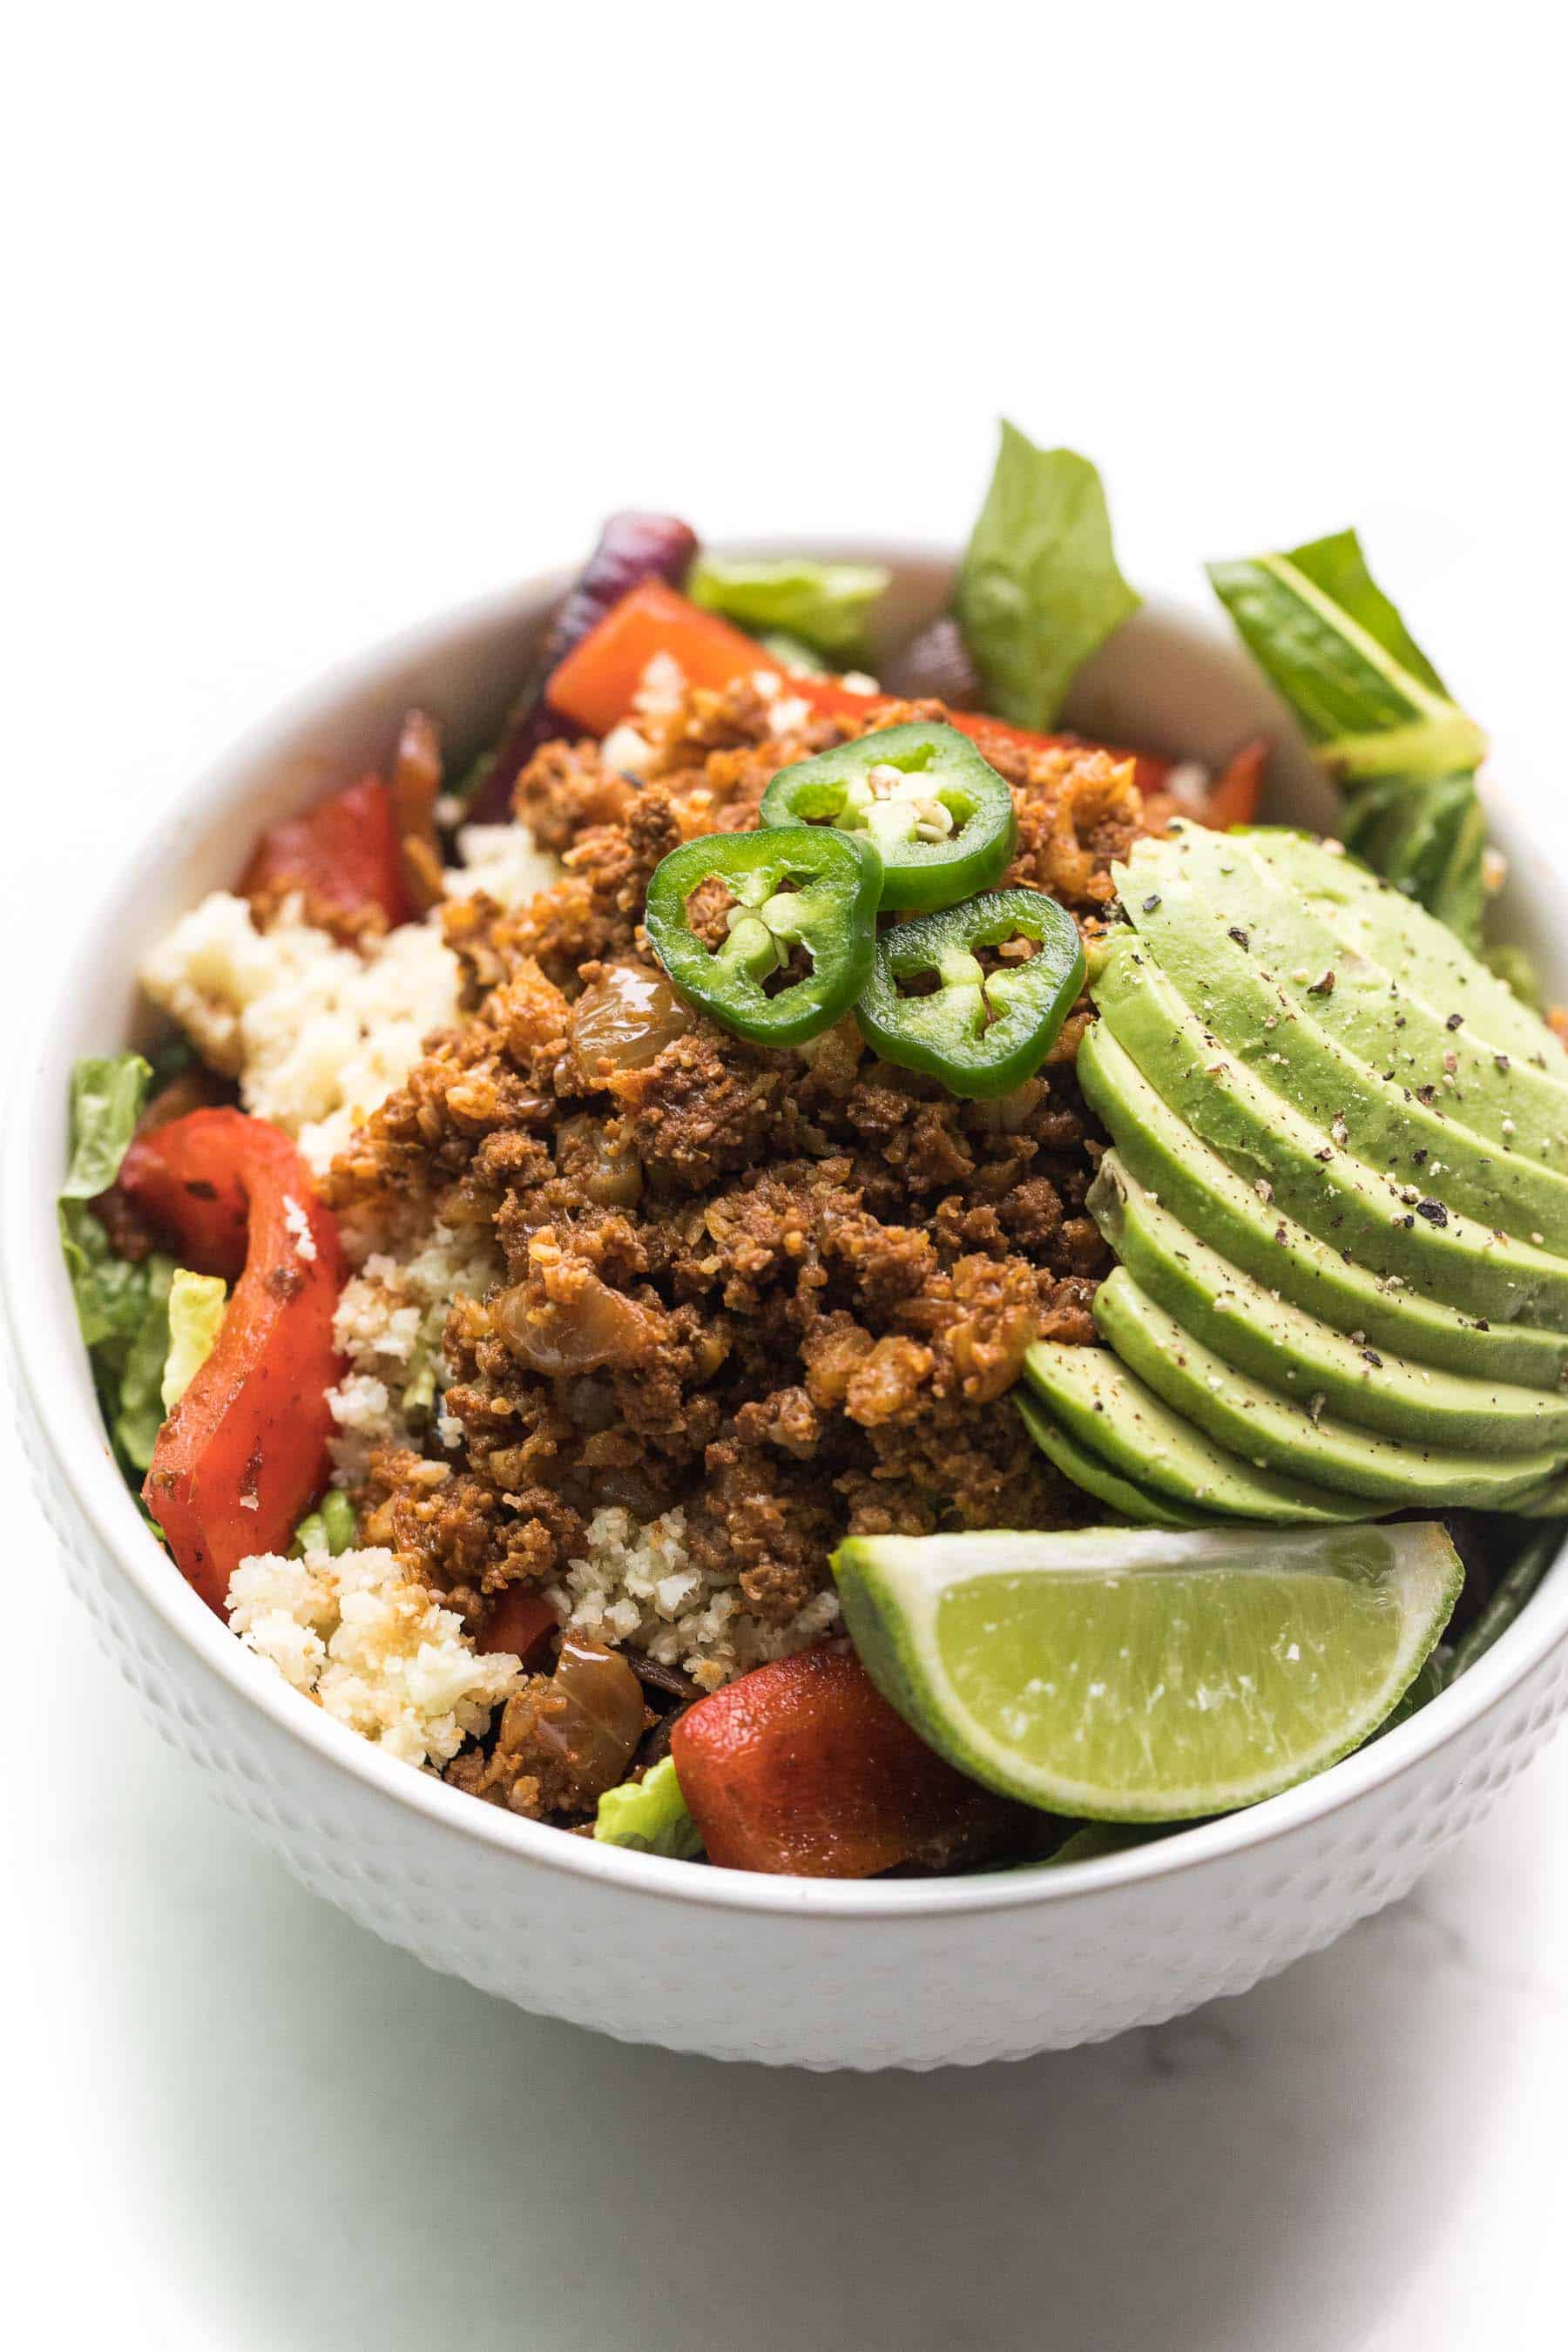 white bowl filled with ground beef, cauliflower rice, veggies, and lettuce, and topped with jalapeno, avocado, and lime